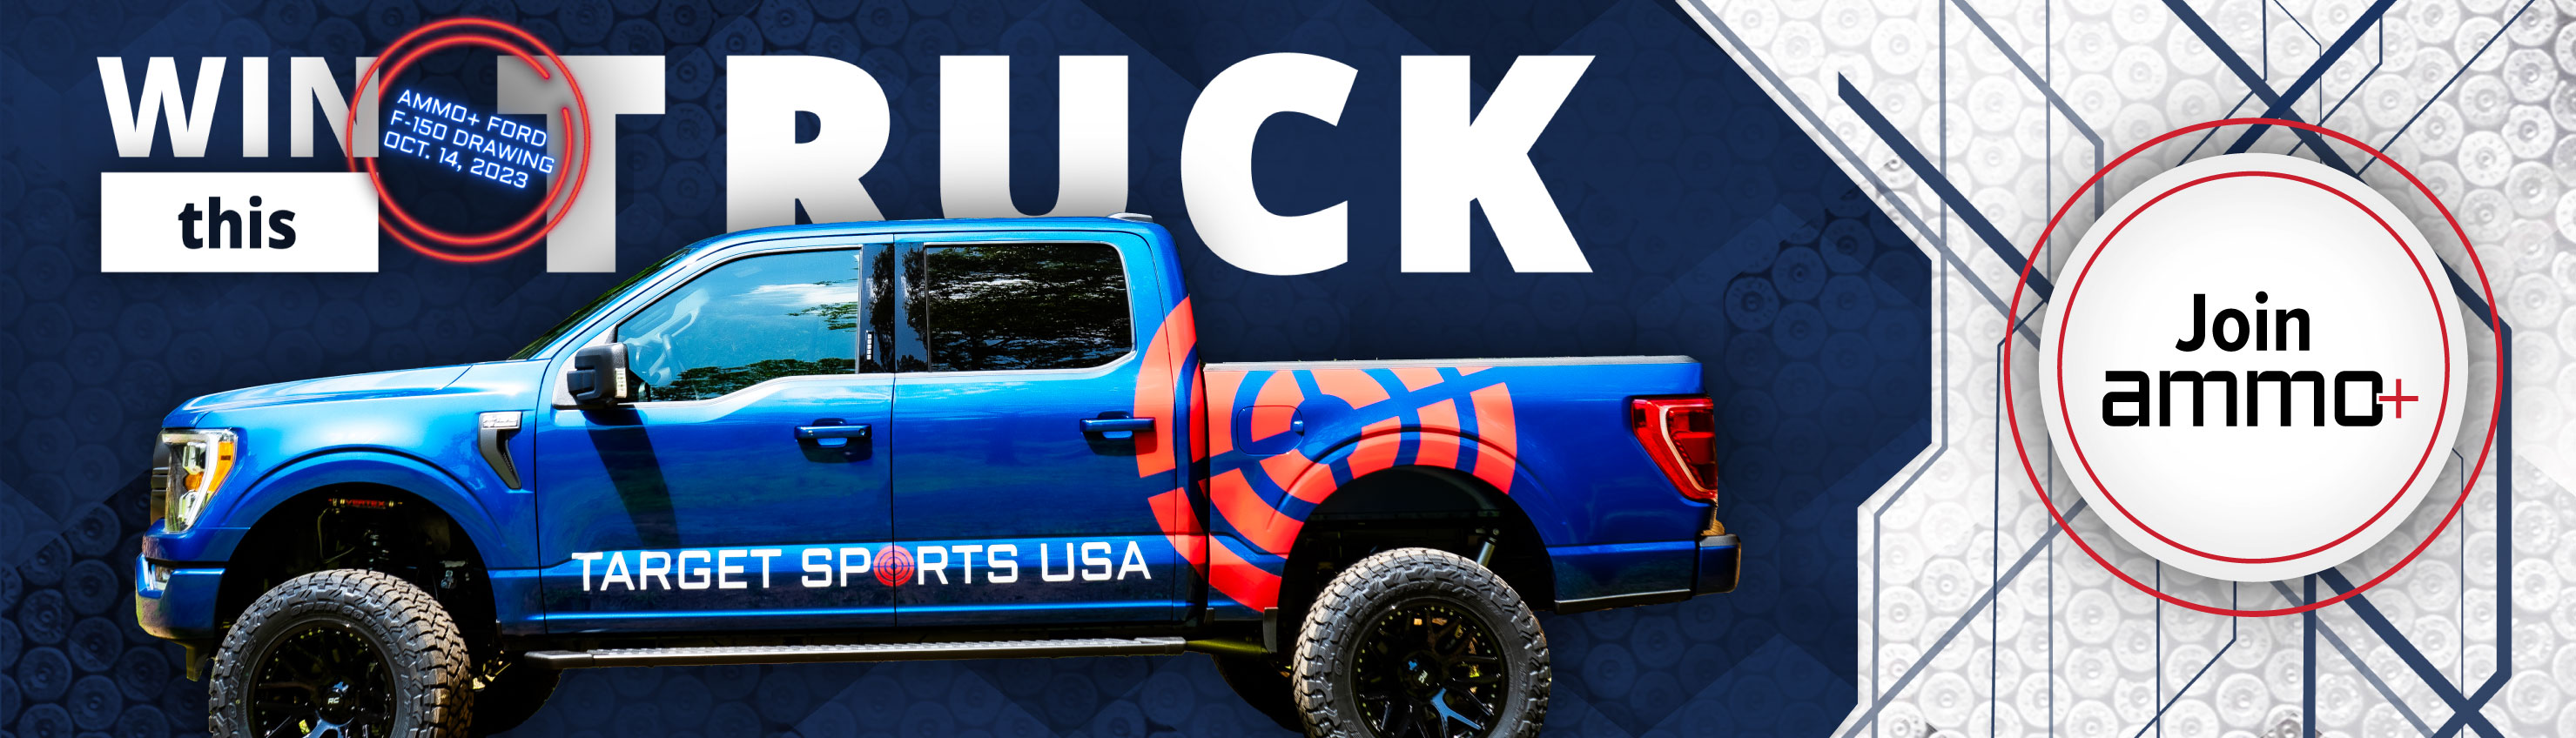 Ammo+ Day Truck Giveaway